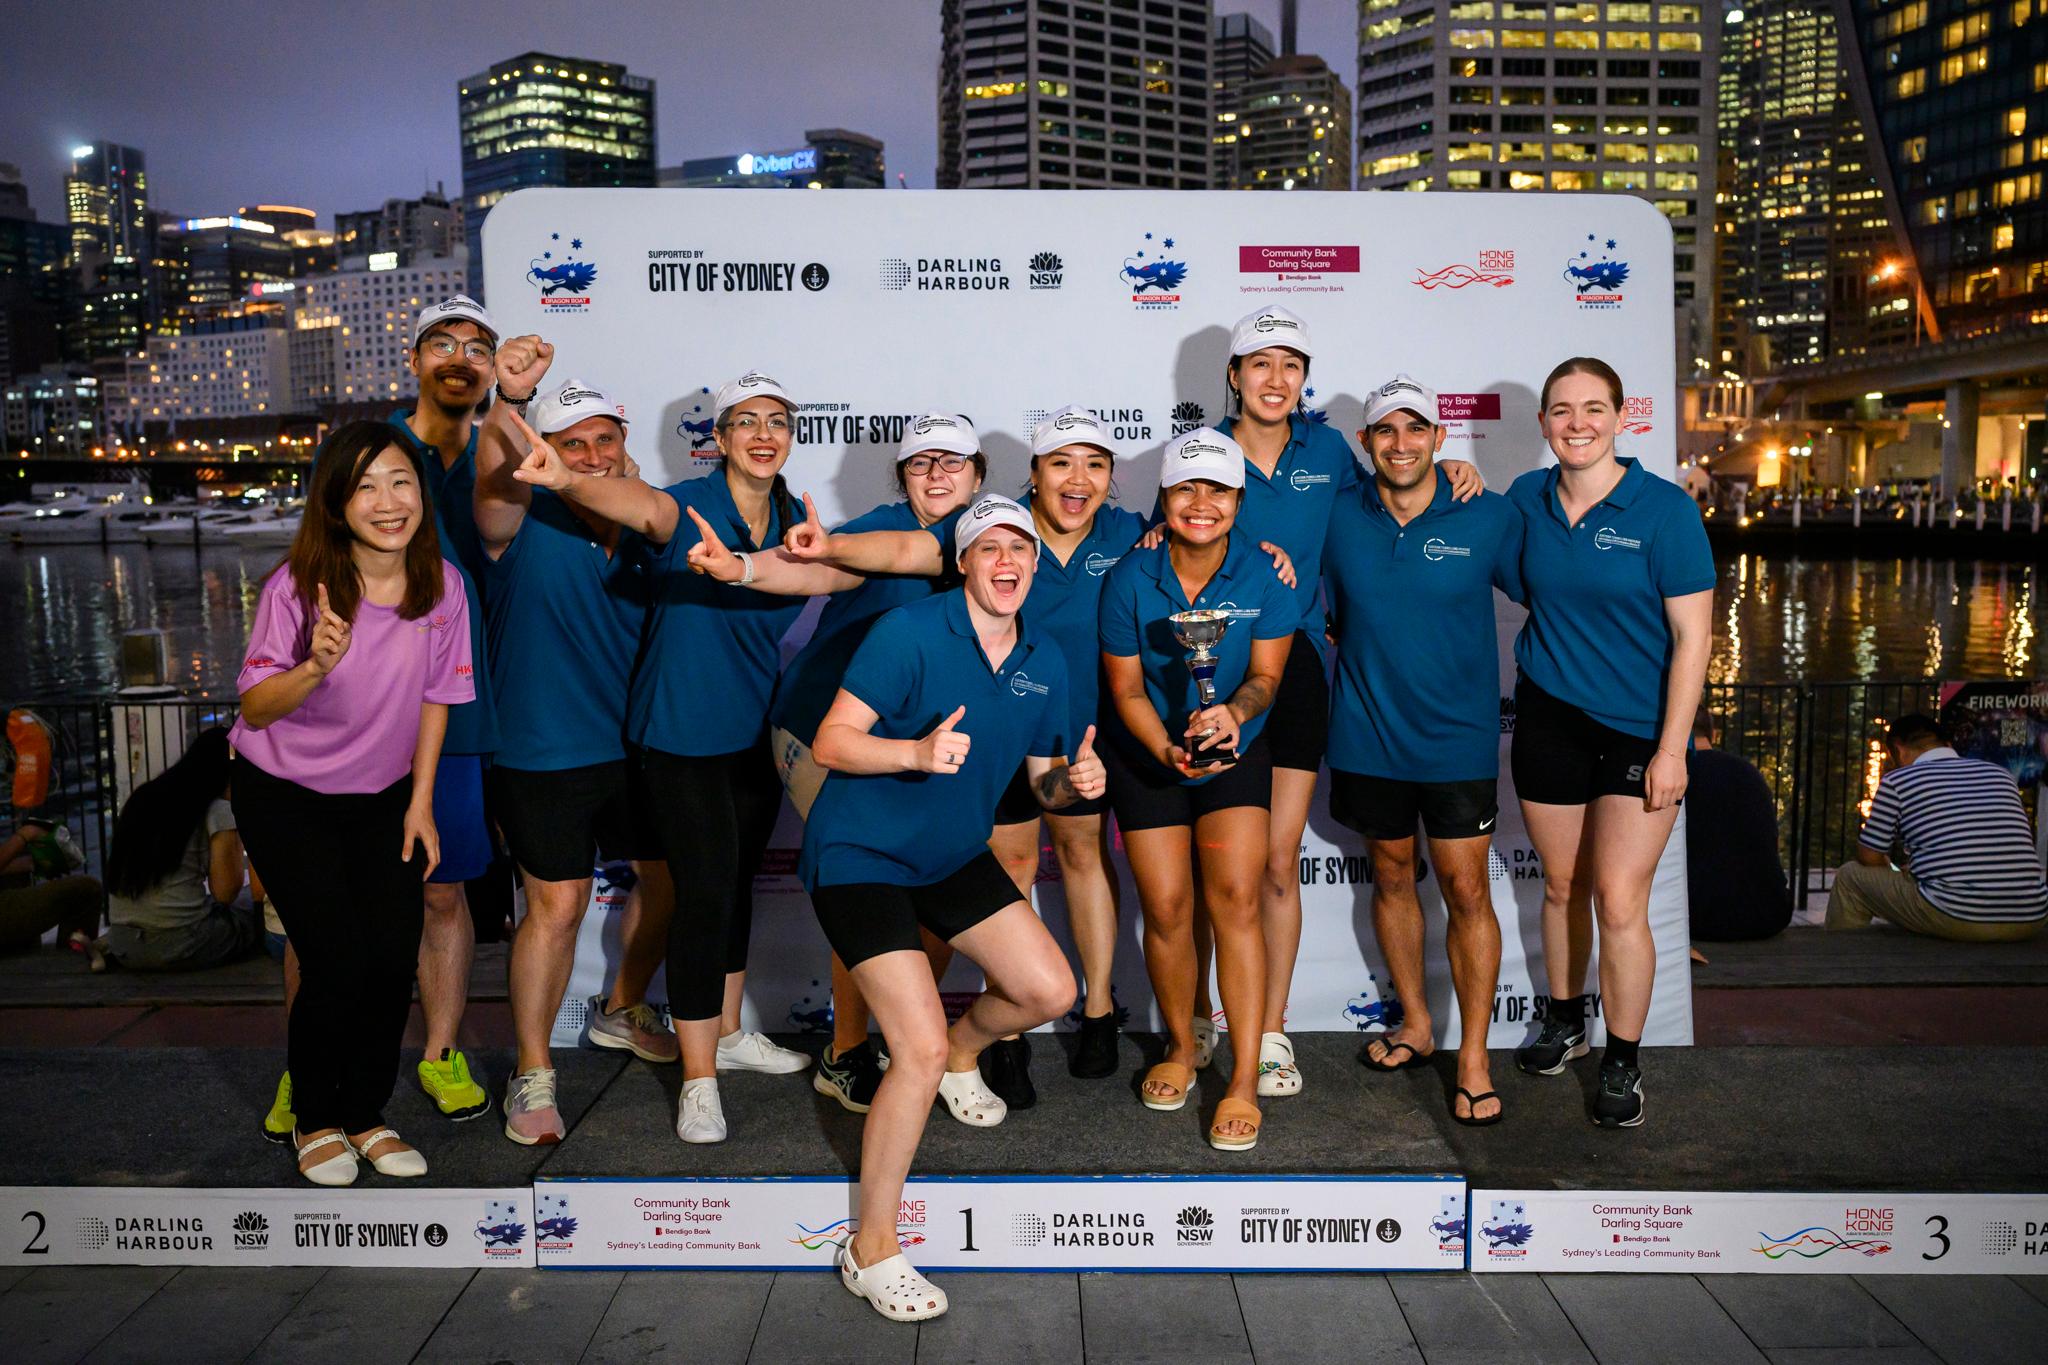 The Hong Kong Economic and Trade Office, Sydney (Sydney ETO) participated in the Sydney Lunar New Year Dragon Boat Festival held in Sydney, Australia, from February 16 to 18. The Director of the Sydney ETO, Miss Trista Lim (first left), presented a trophy to the winning team of the Hong Kong Metropolis Cup on February 16.

